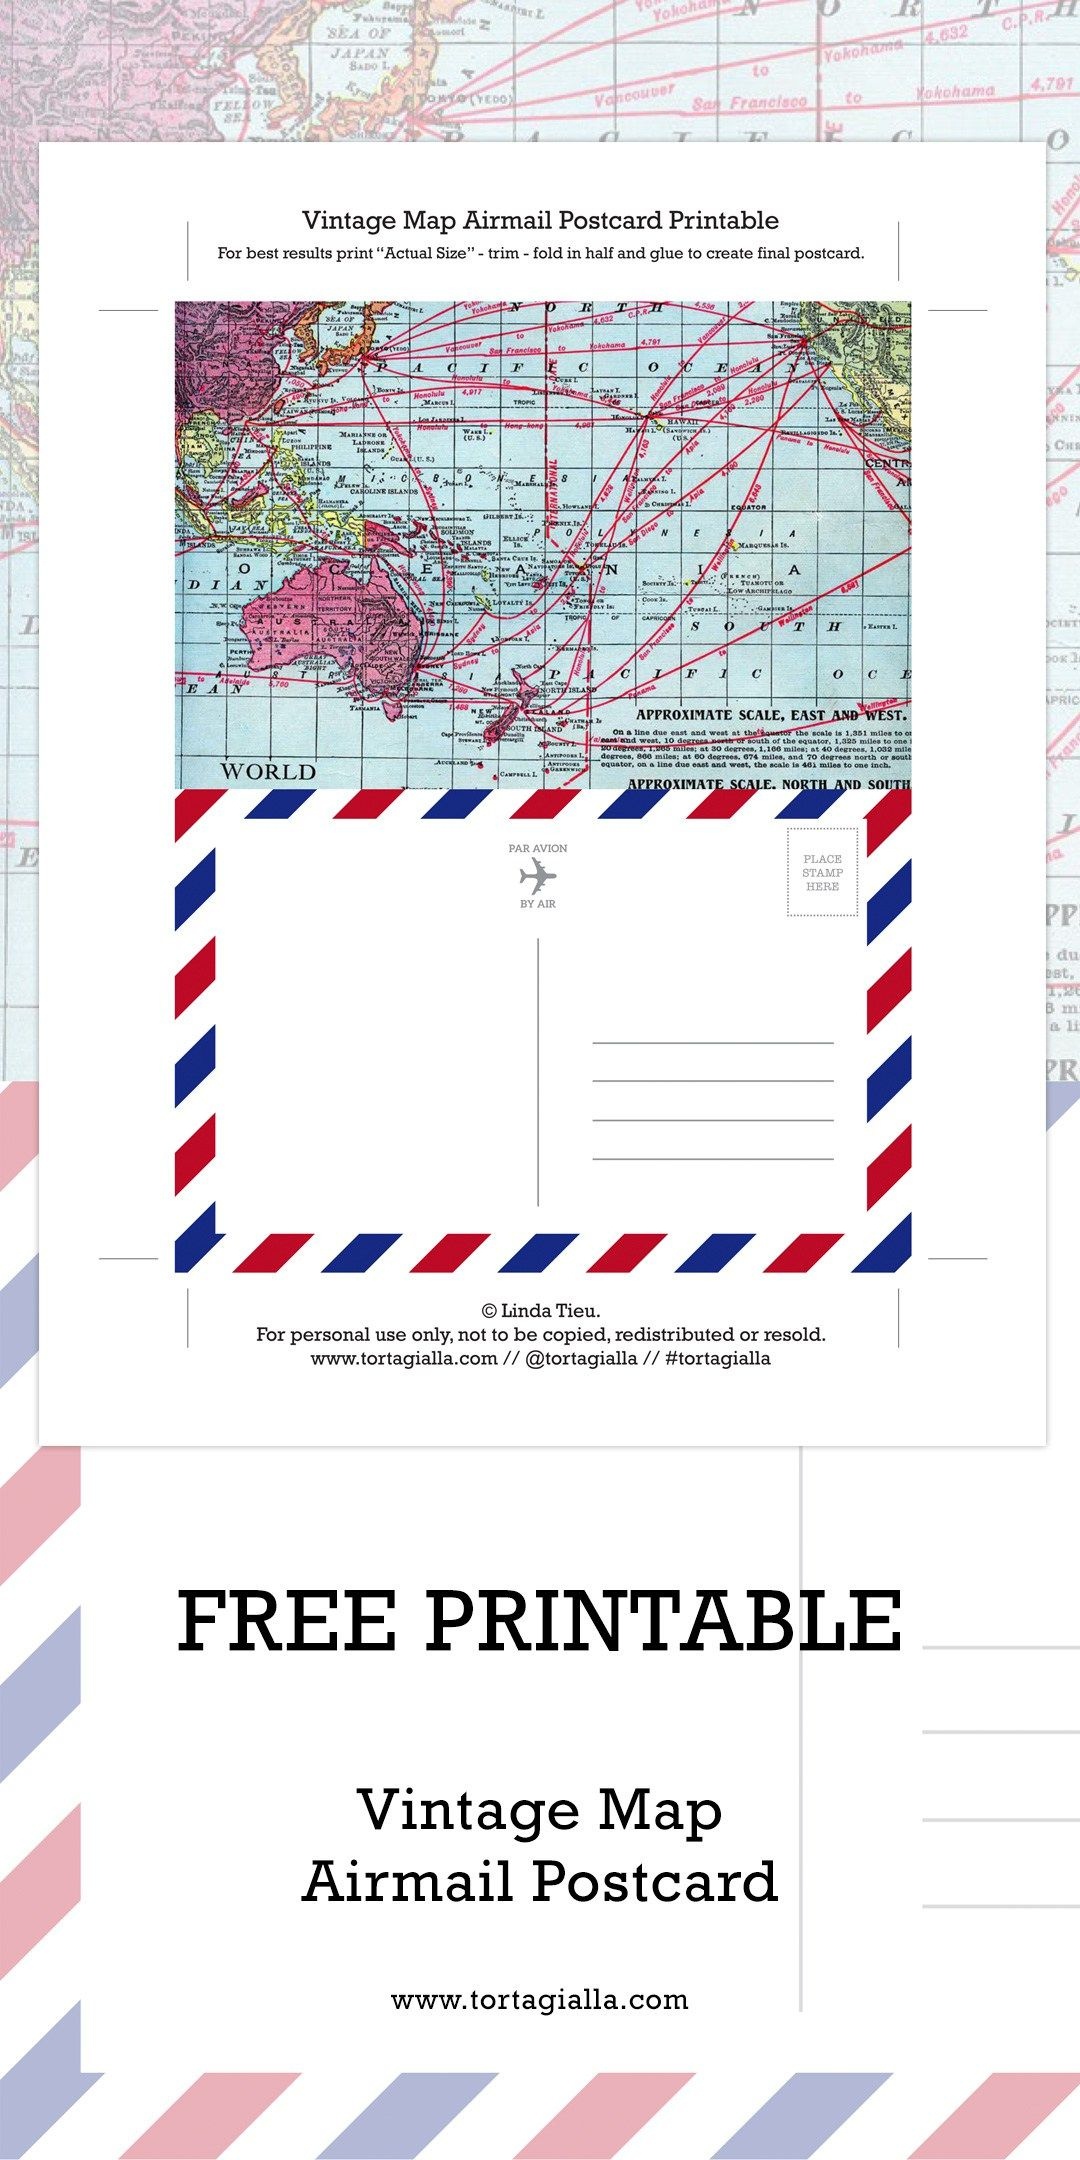 Print Your Own Vintage Map Airmail Postcard | Happy Mail | Vintage - Free Printable Postcards